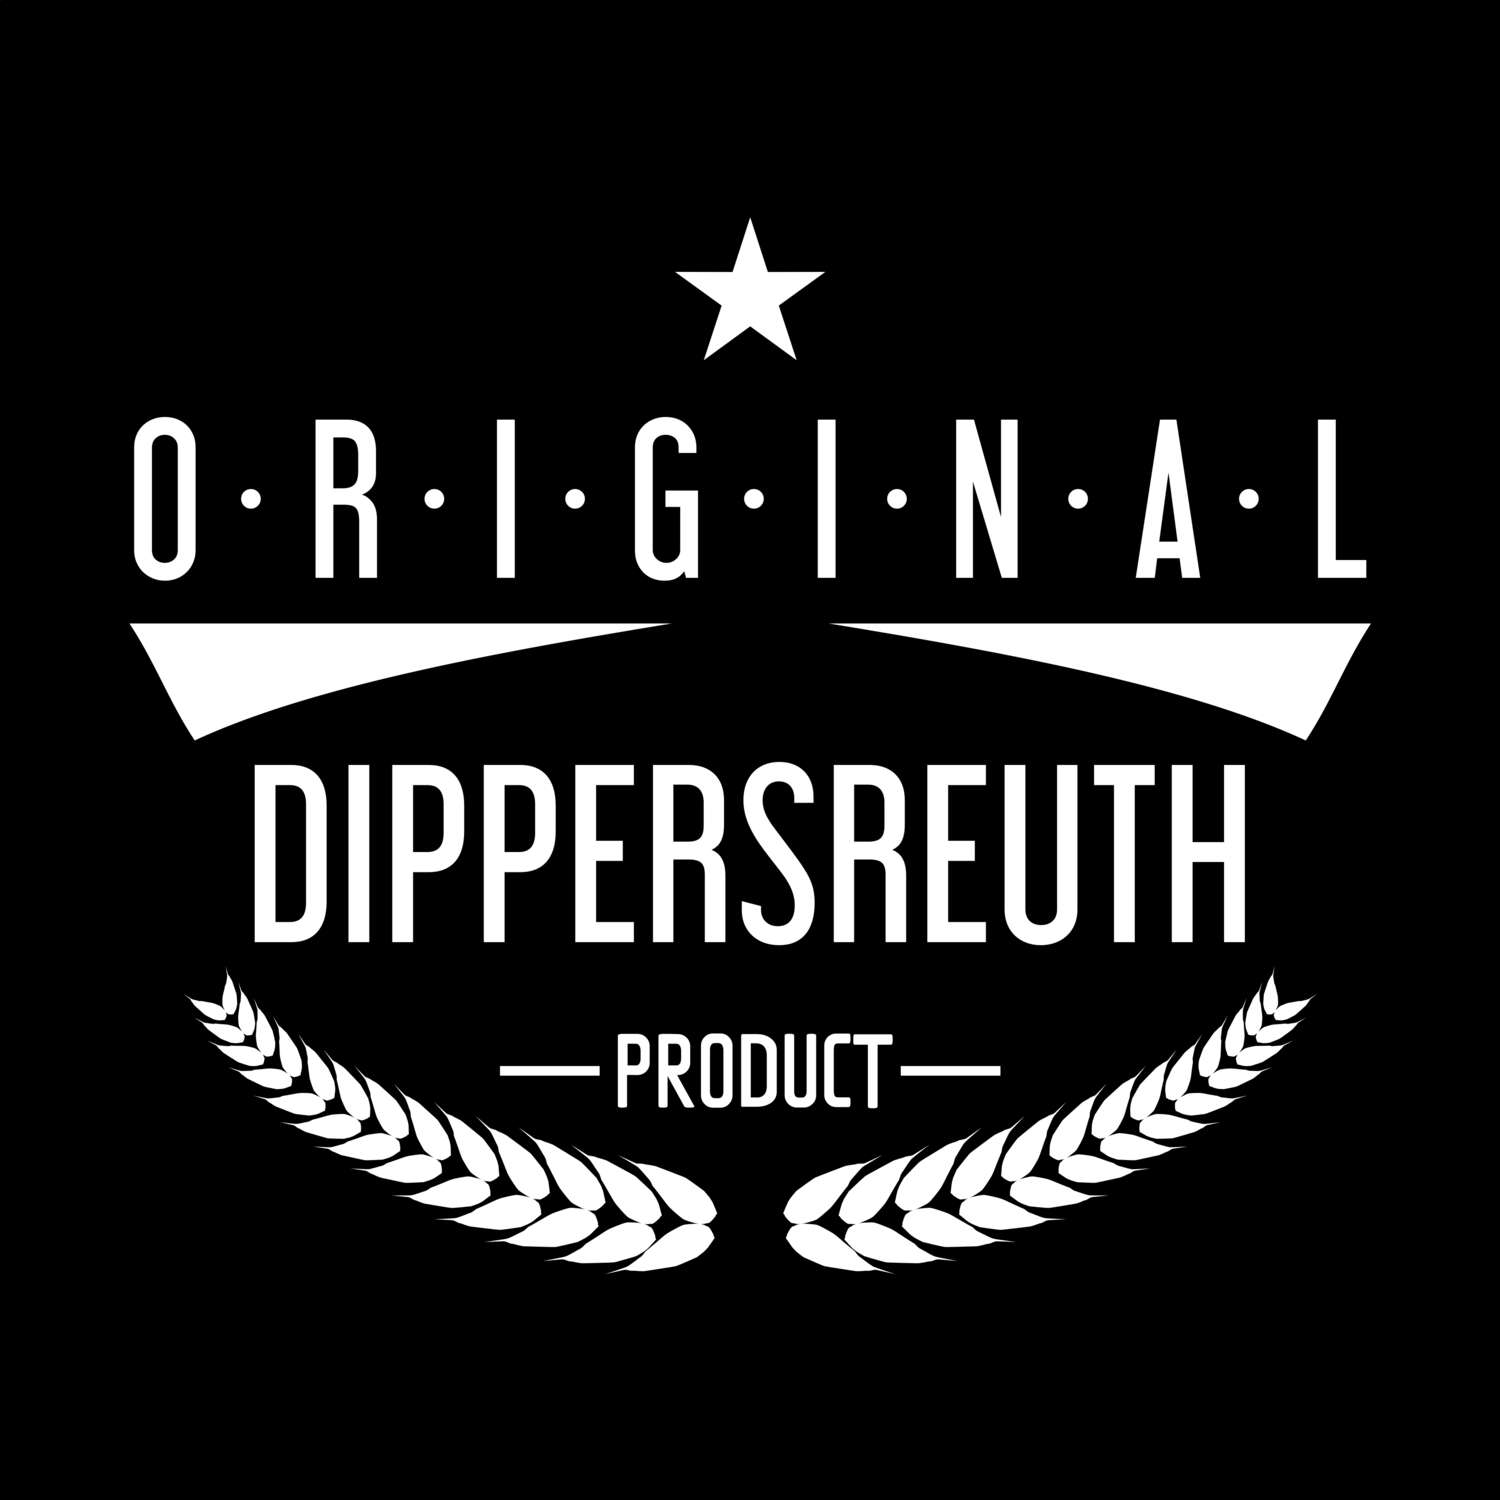 Dippersreuth T-Shirt »Original Product«